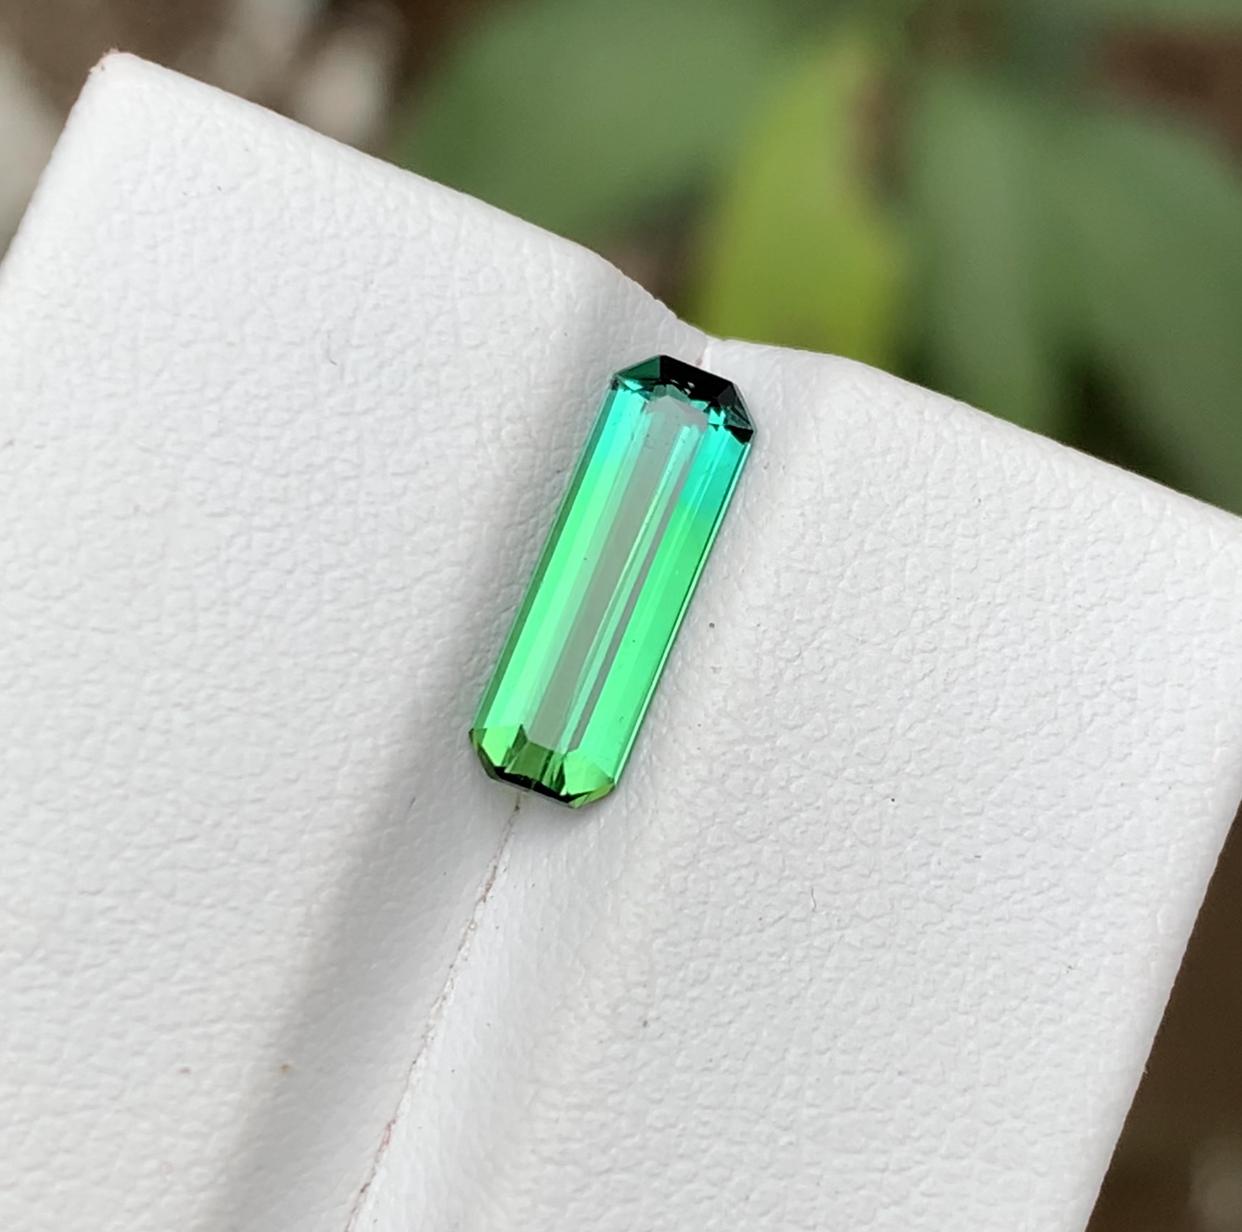 GEMSTONE TYPE: Tourmaline
PIECE(S): 1
WEIGHT: 1.50 Carats
SHAPE: Emerald
SIZE (MM): 12.58 x 4.20 x 2.99
COLOR: Vivid Neon Green & Blue Bicolor
CLARITY: Approx Eye Clean
TREATMENT: None
ORIGIN: Afghanistan
CERTIFICATE: On demand

Truly exquisite 1.50